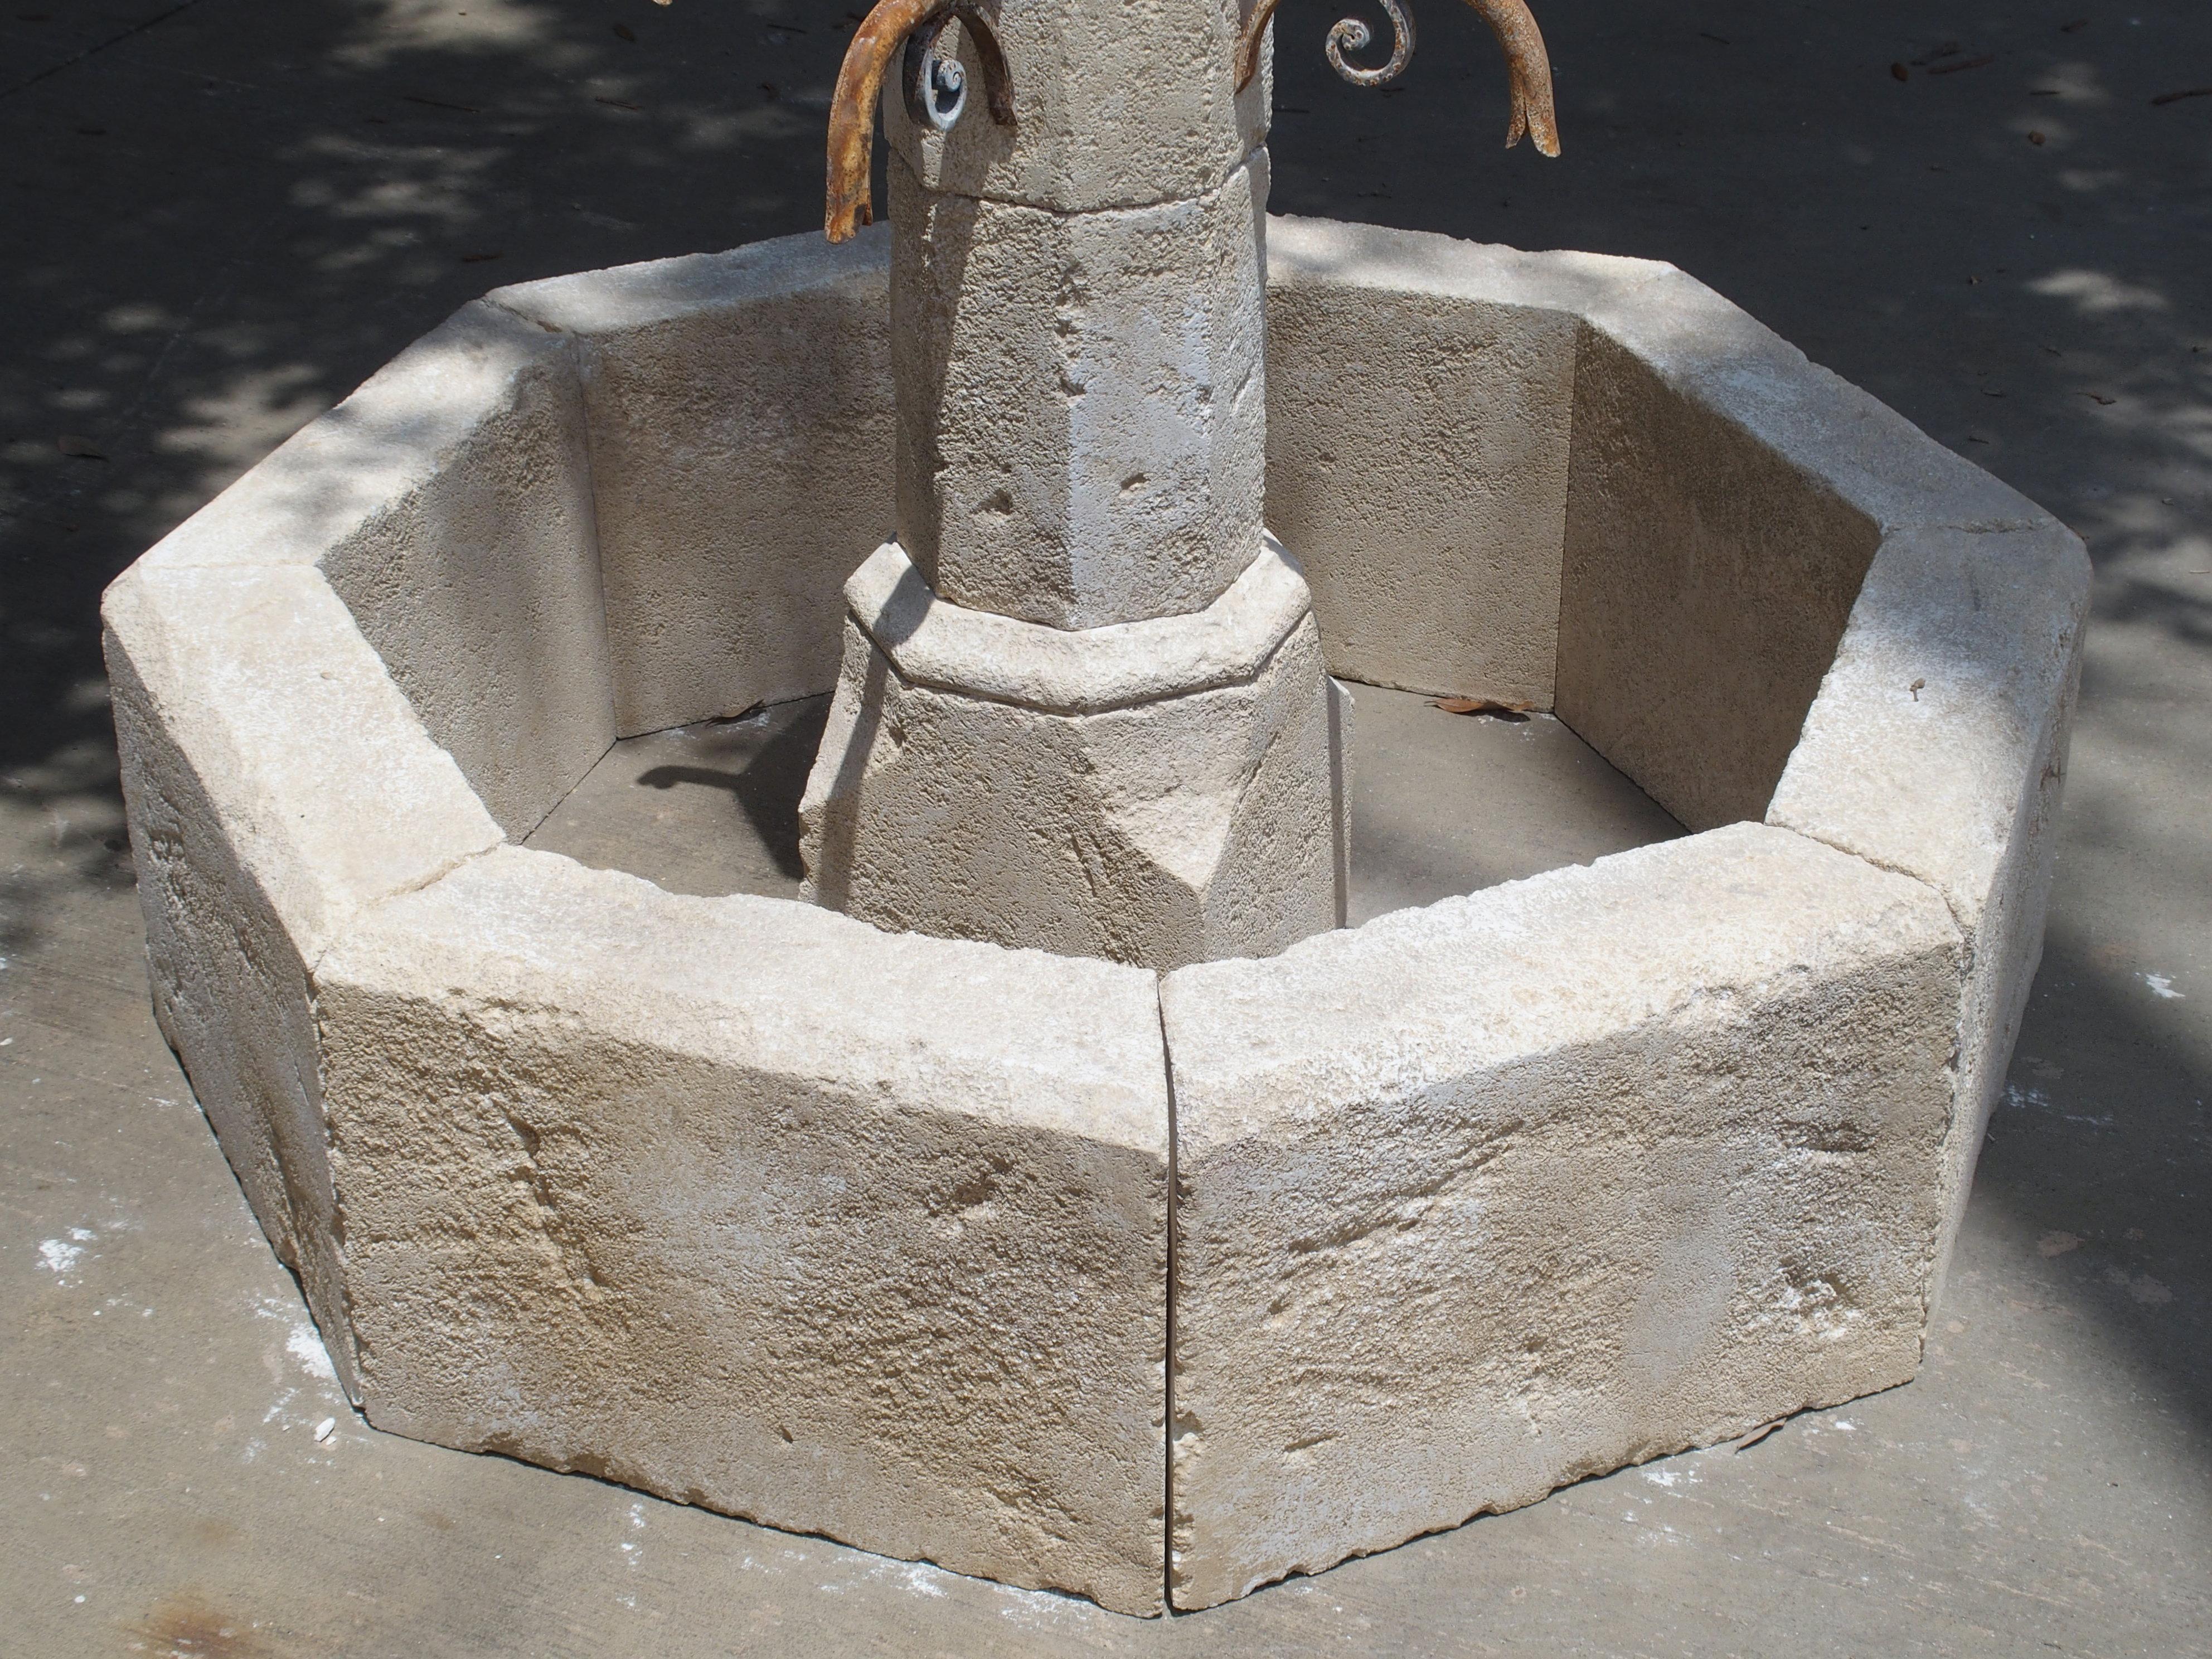 French Small Limestone Center Village Fountain from Provence, France